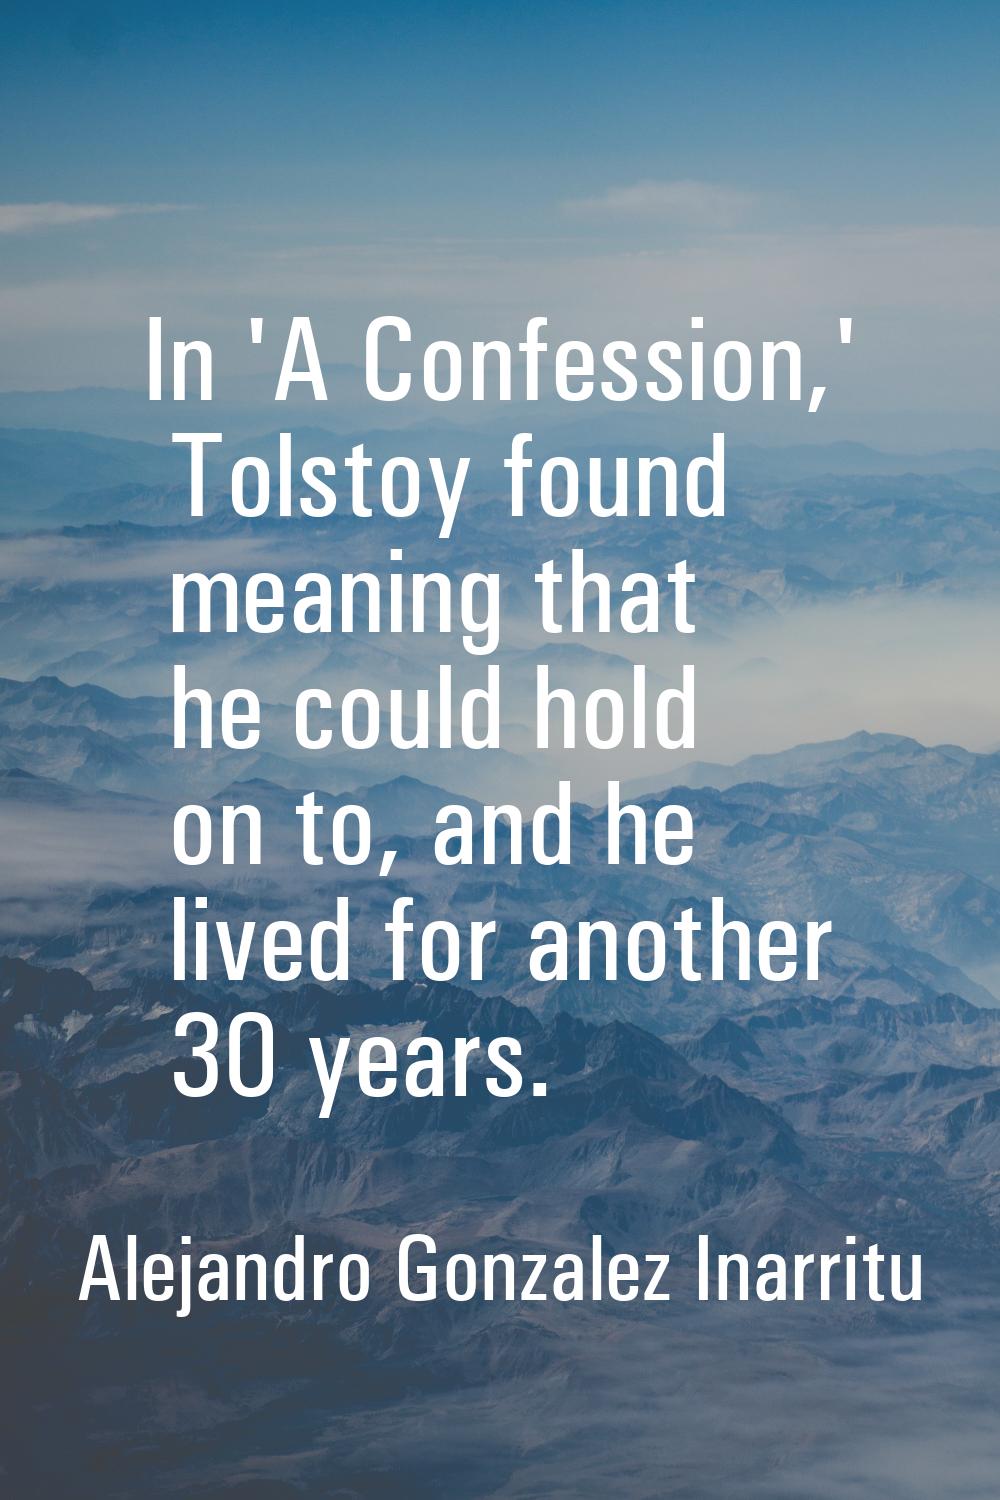 In 'A Confession,' Tolstoy found meaning that he could hold on to, and he lived for another 30 year